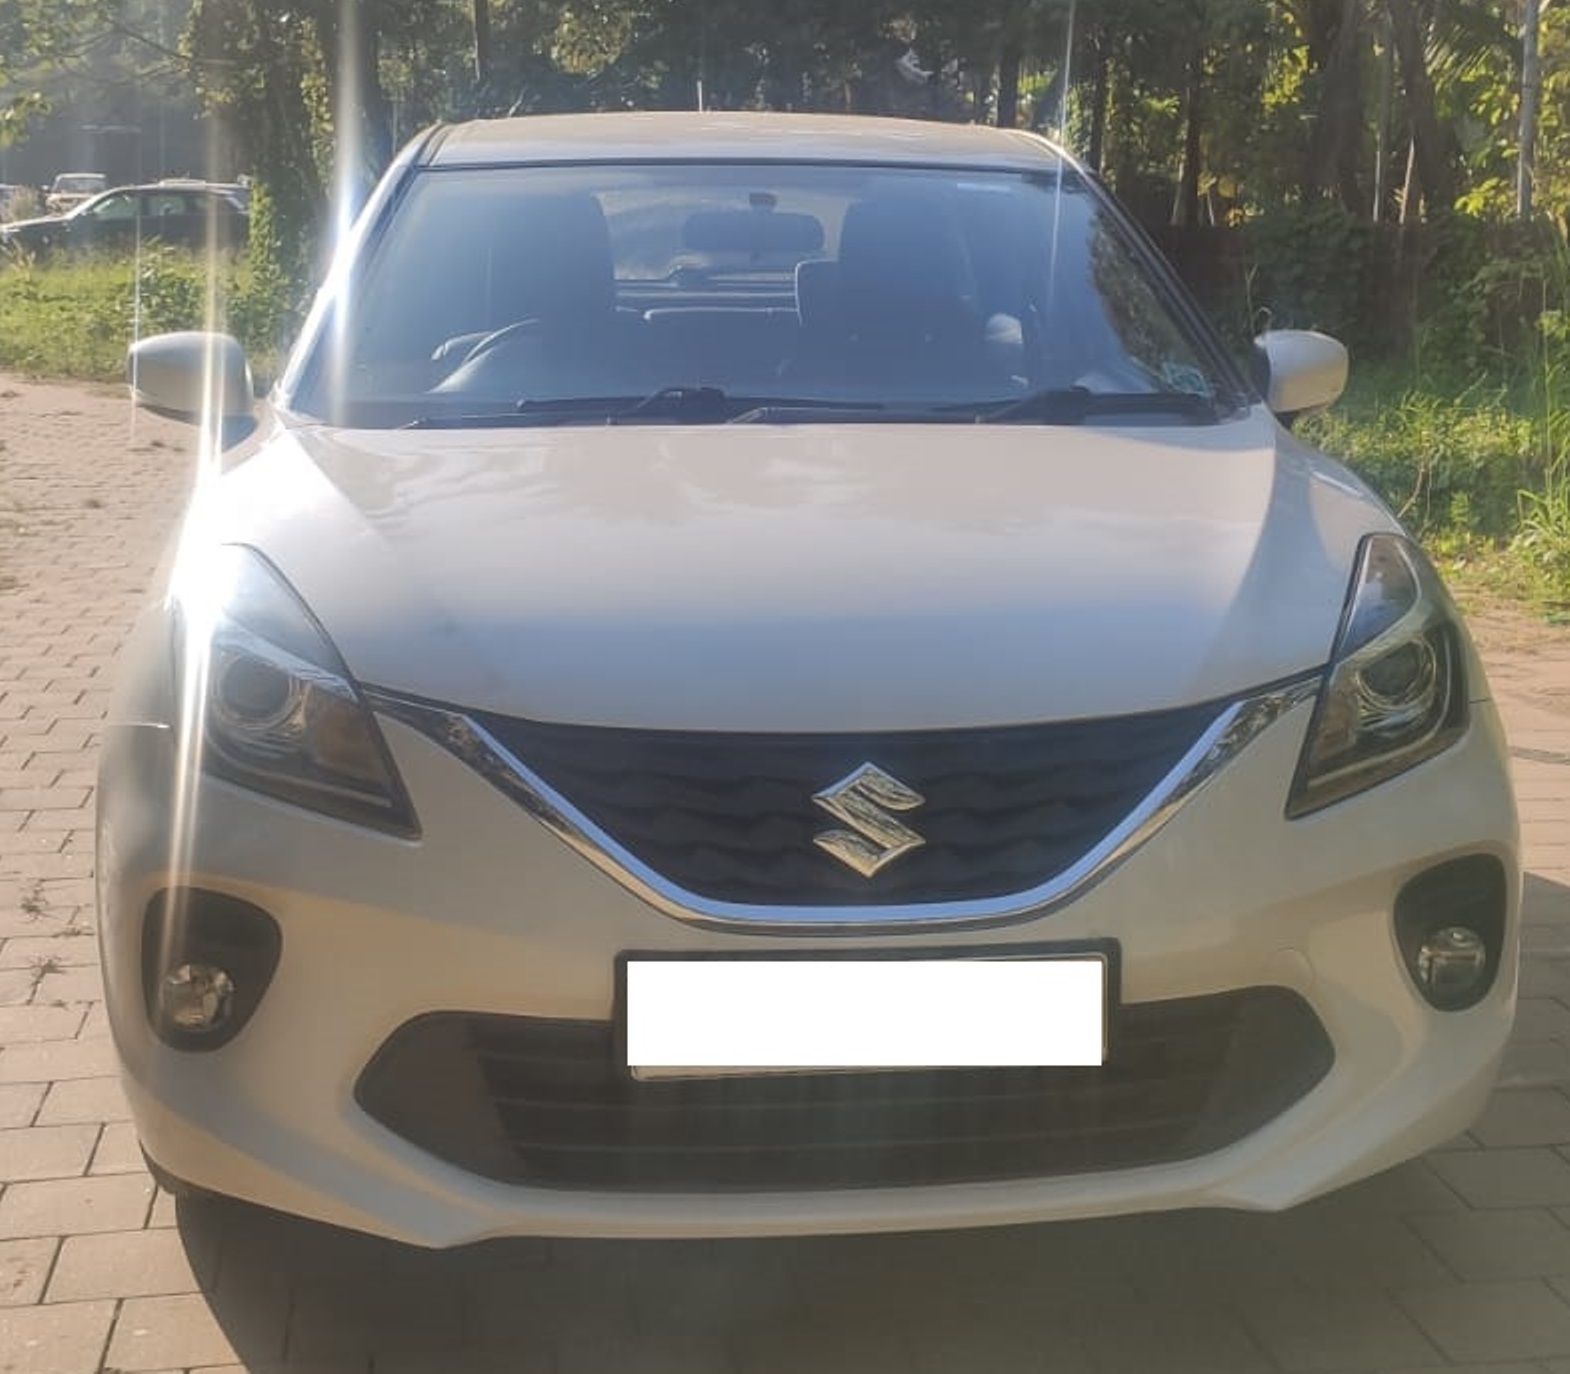 MARUTI BALENO 2020 Second-hand Car for Sale in Kannur